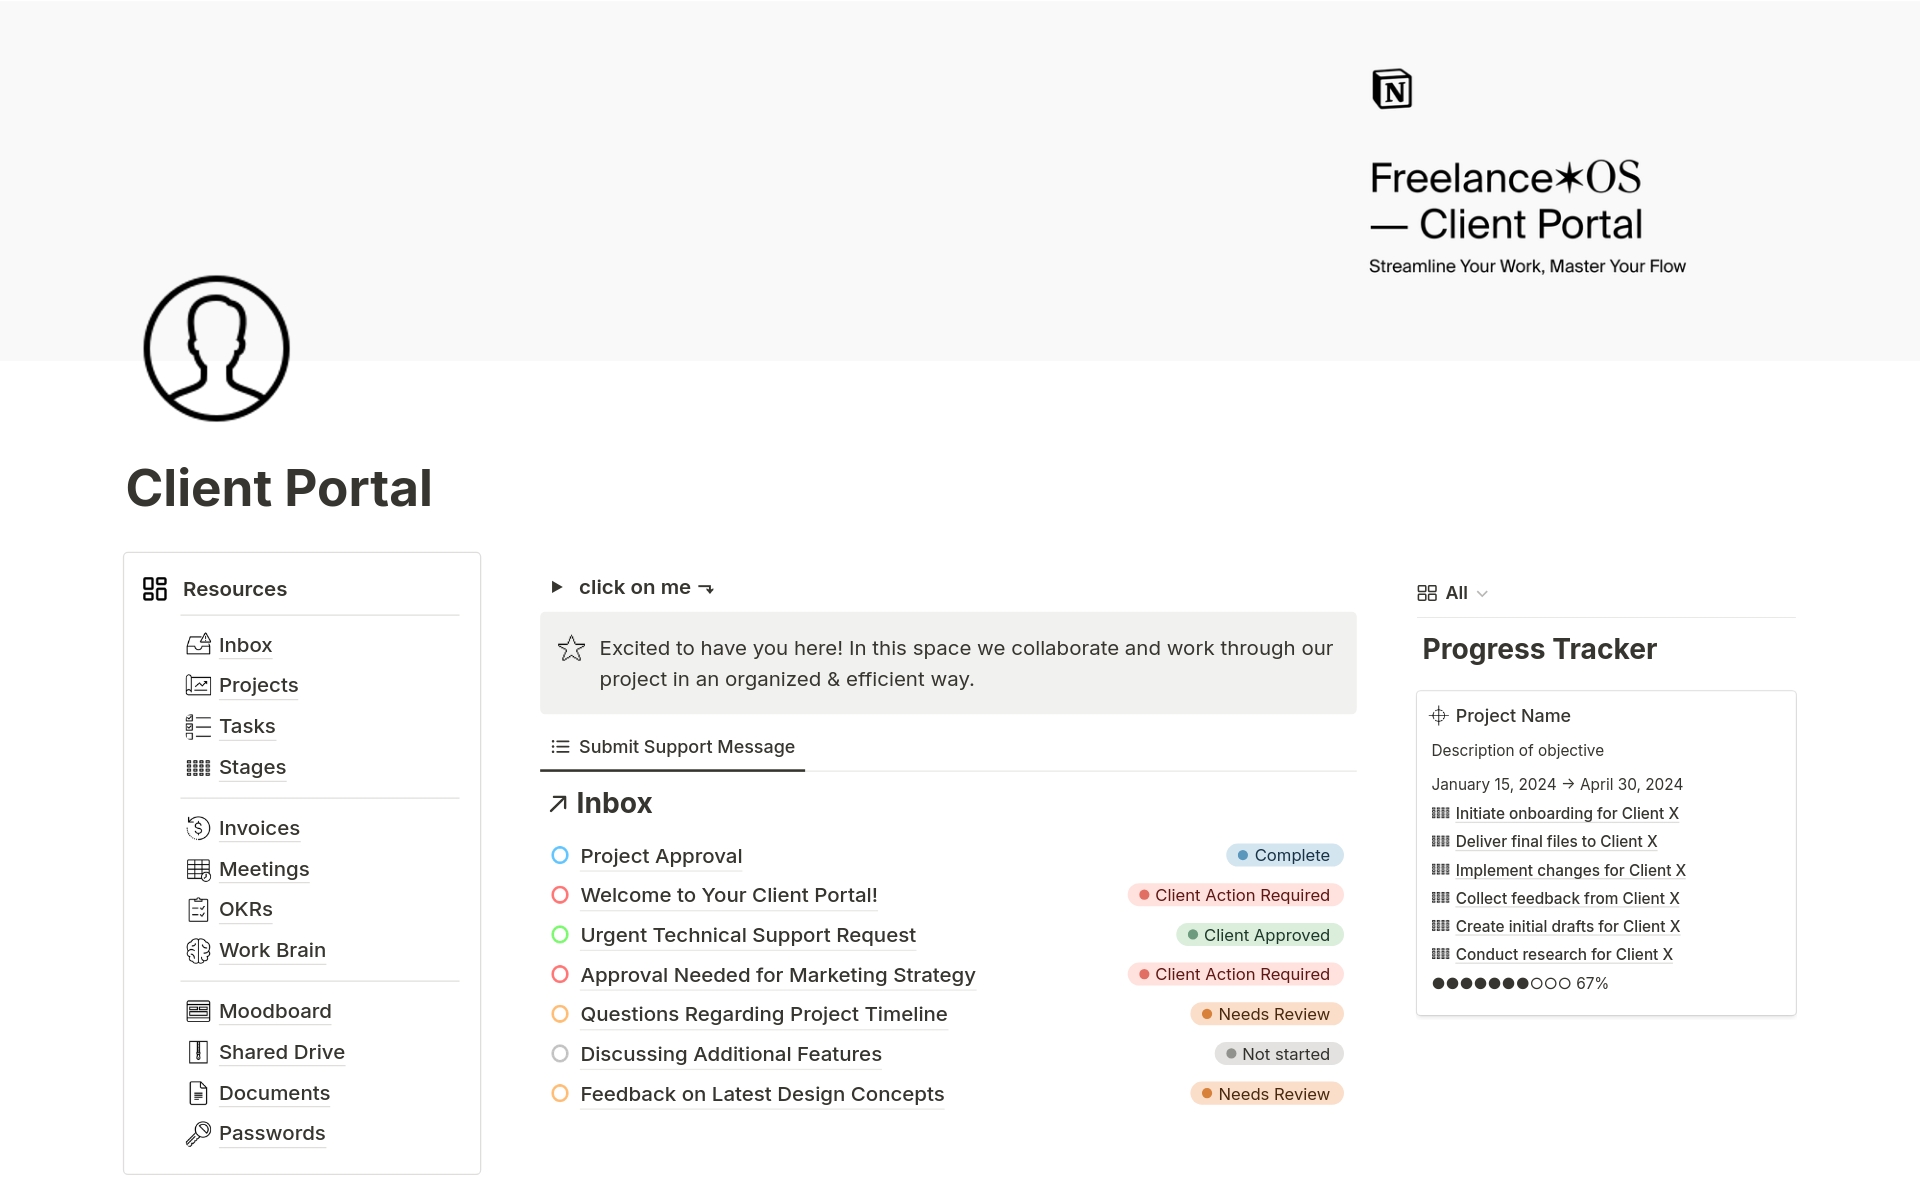 The “Client Portal” is your all-in-one solution for effective project management and client collaboration. This template designed to simplify your freelance workflow, ensure project success and simplifies client interaction & project management.